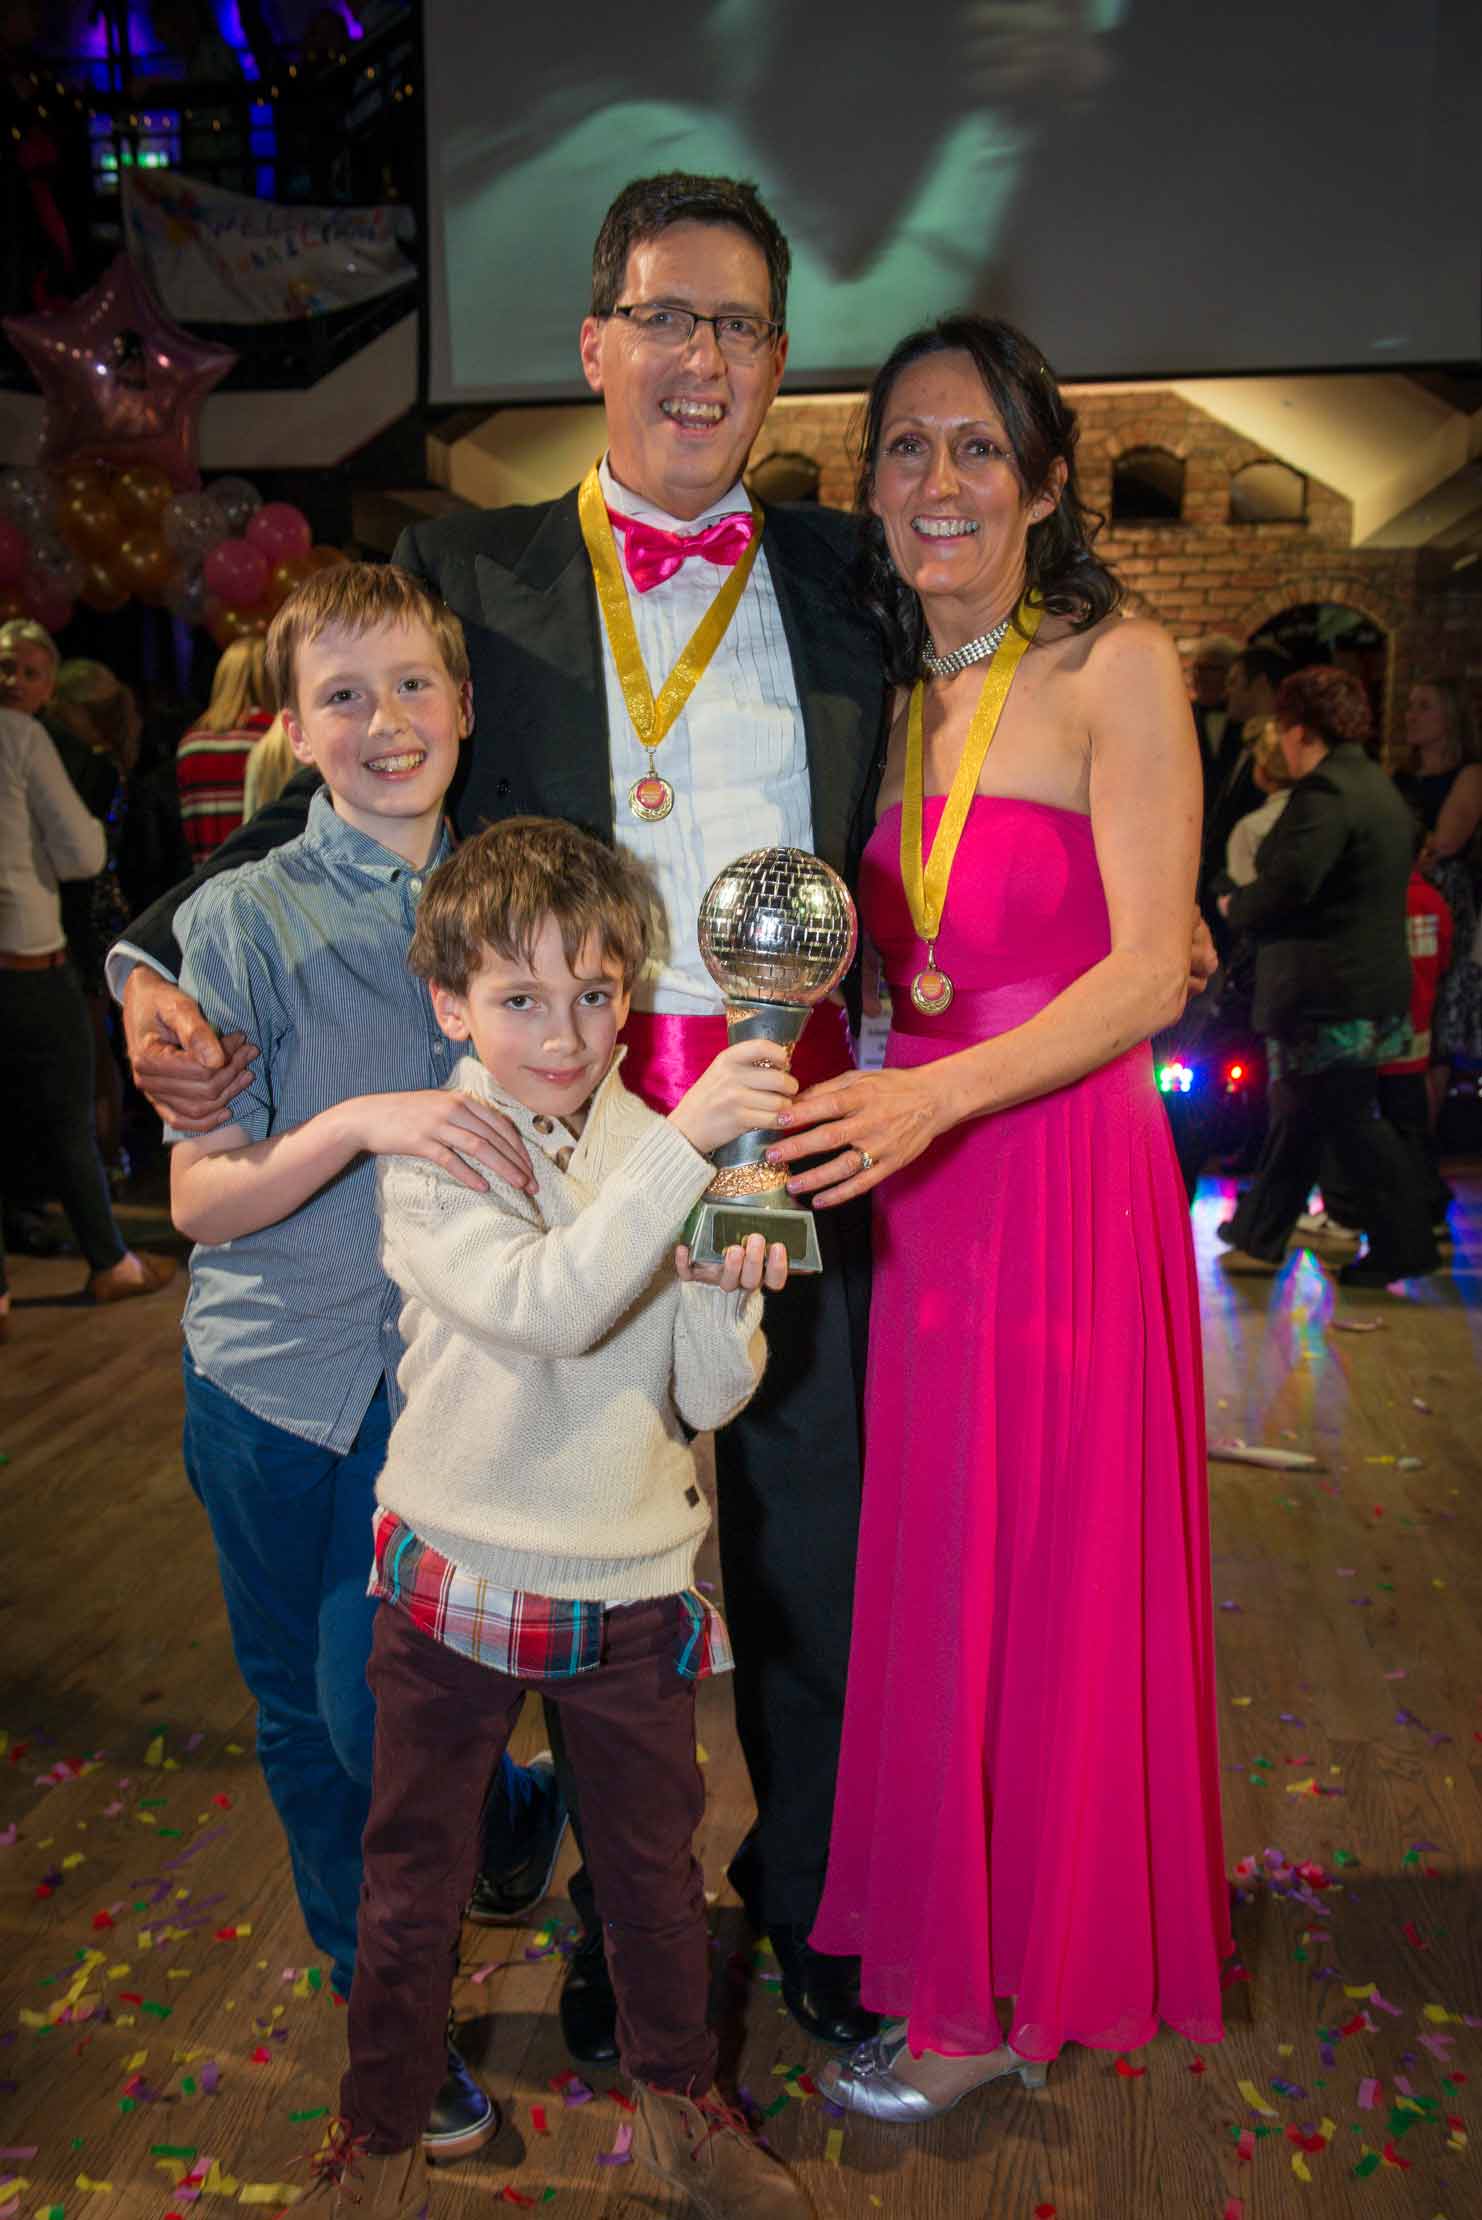 trictly Get Dancing competition took place at the Engine Shed in Wetherby